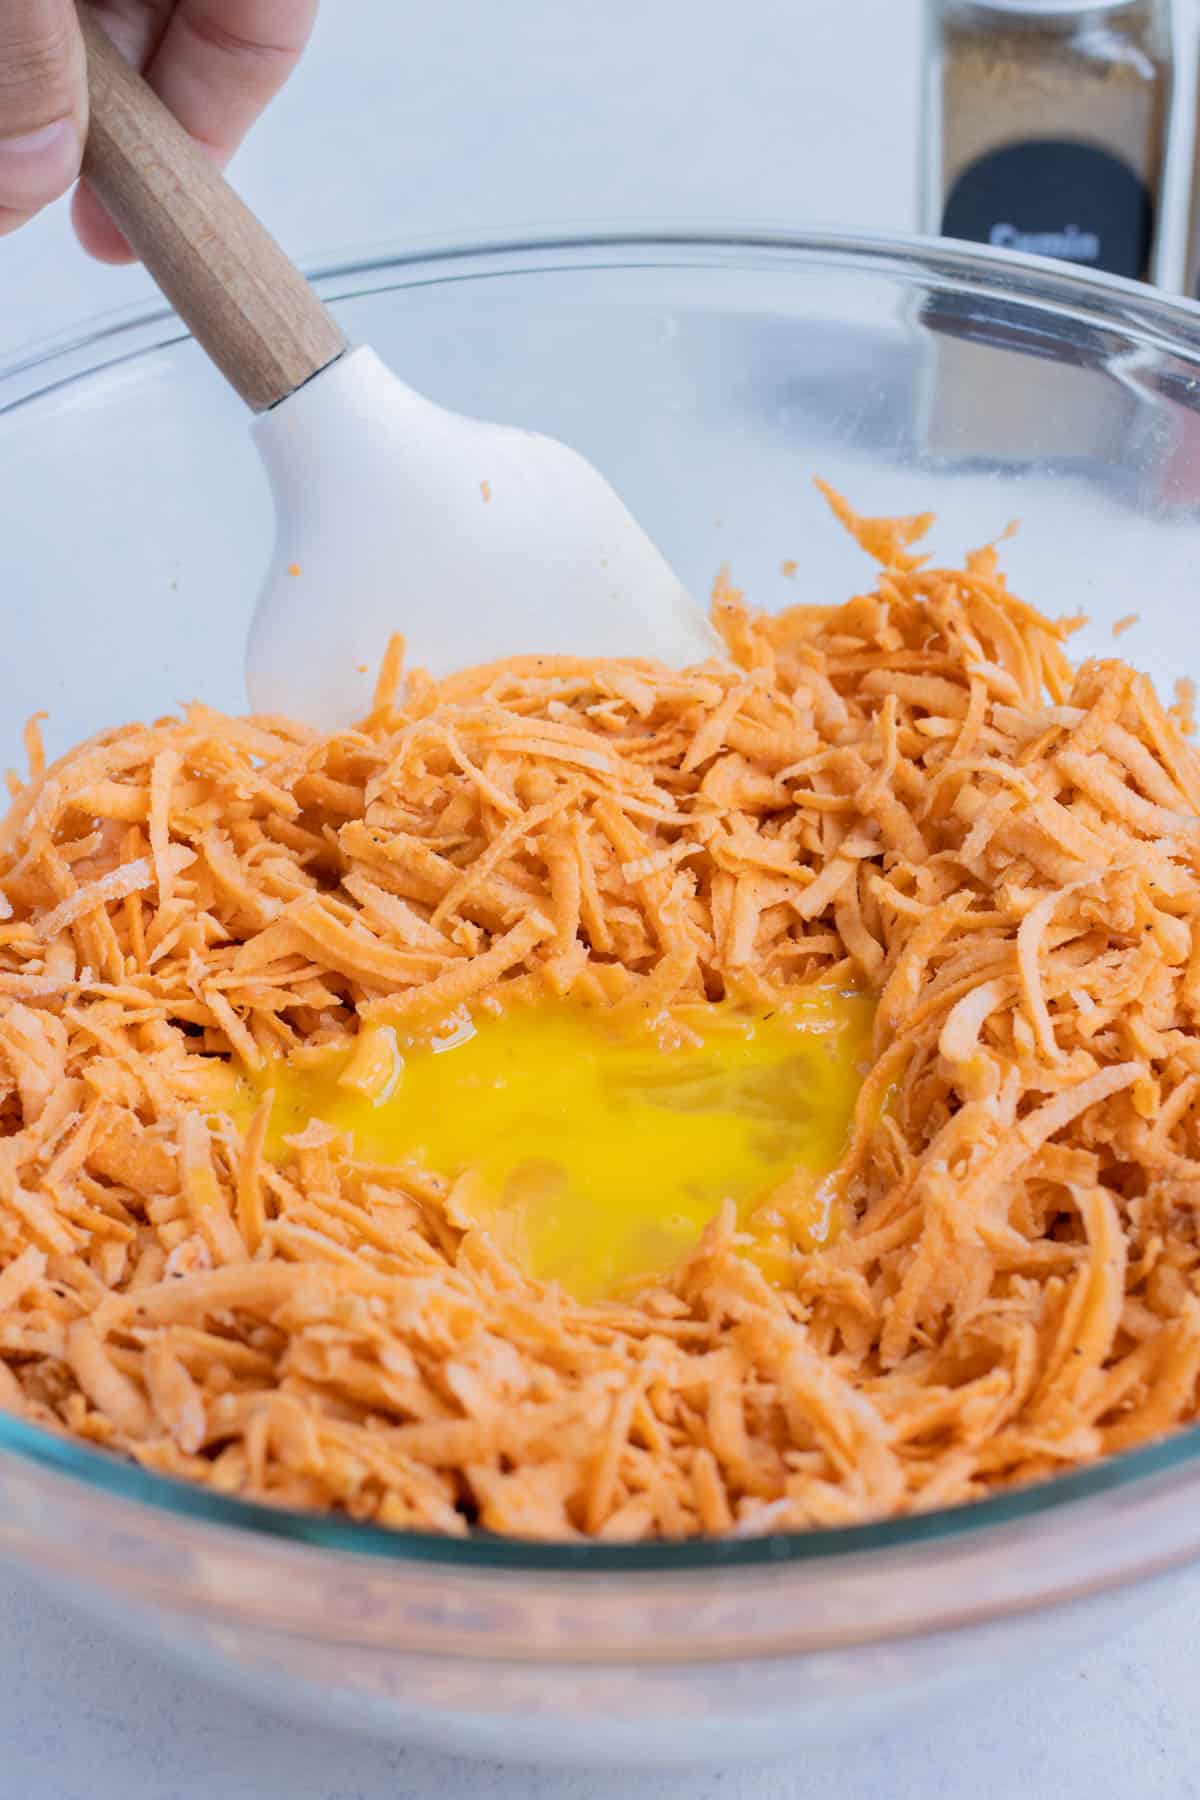 Egg is added to the grated sweet potatoes.